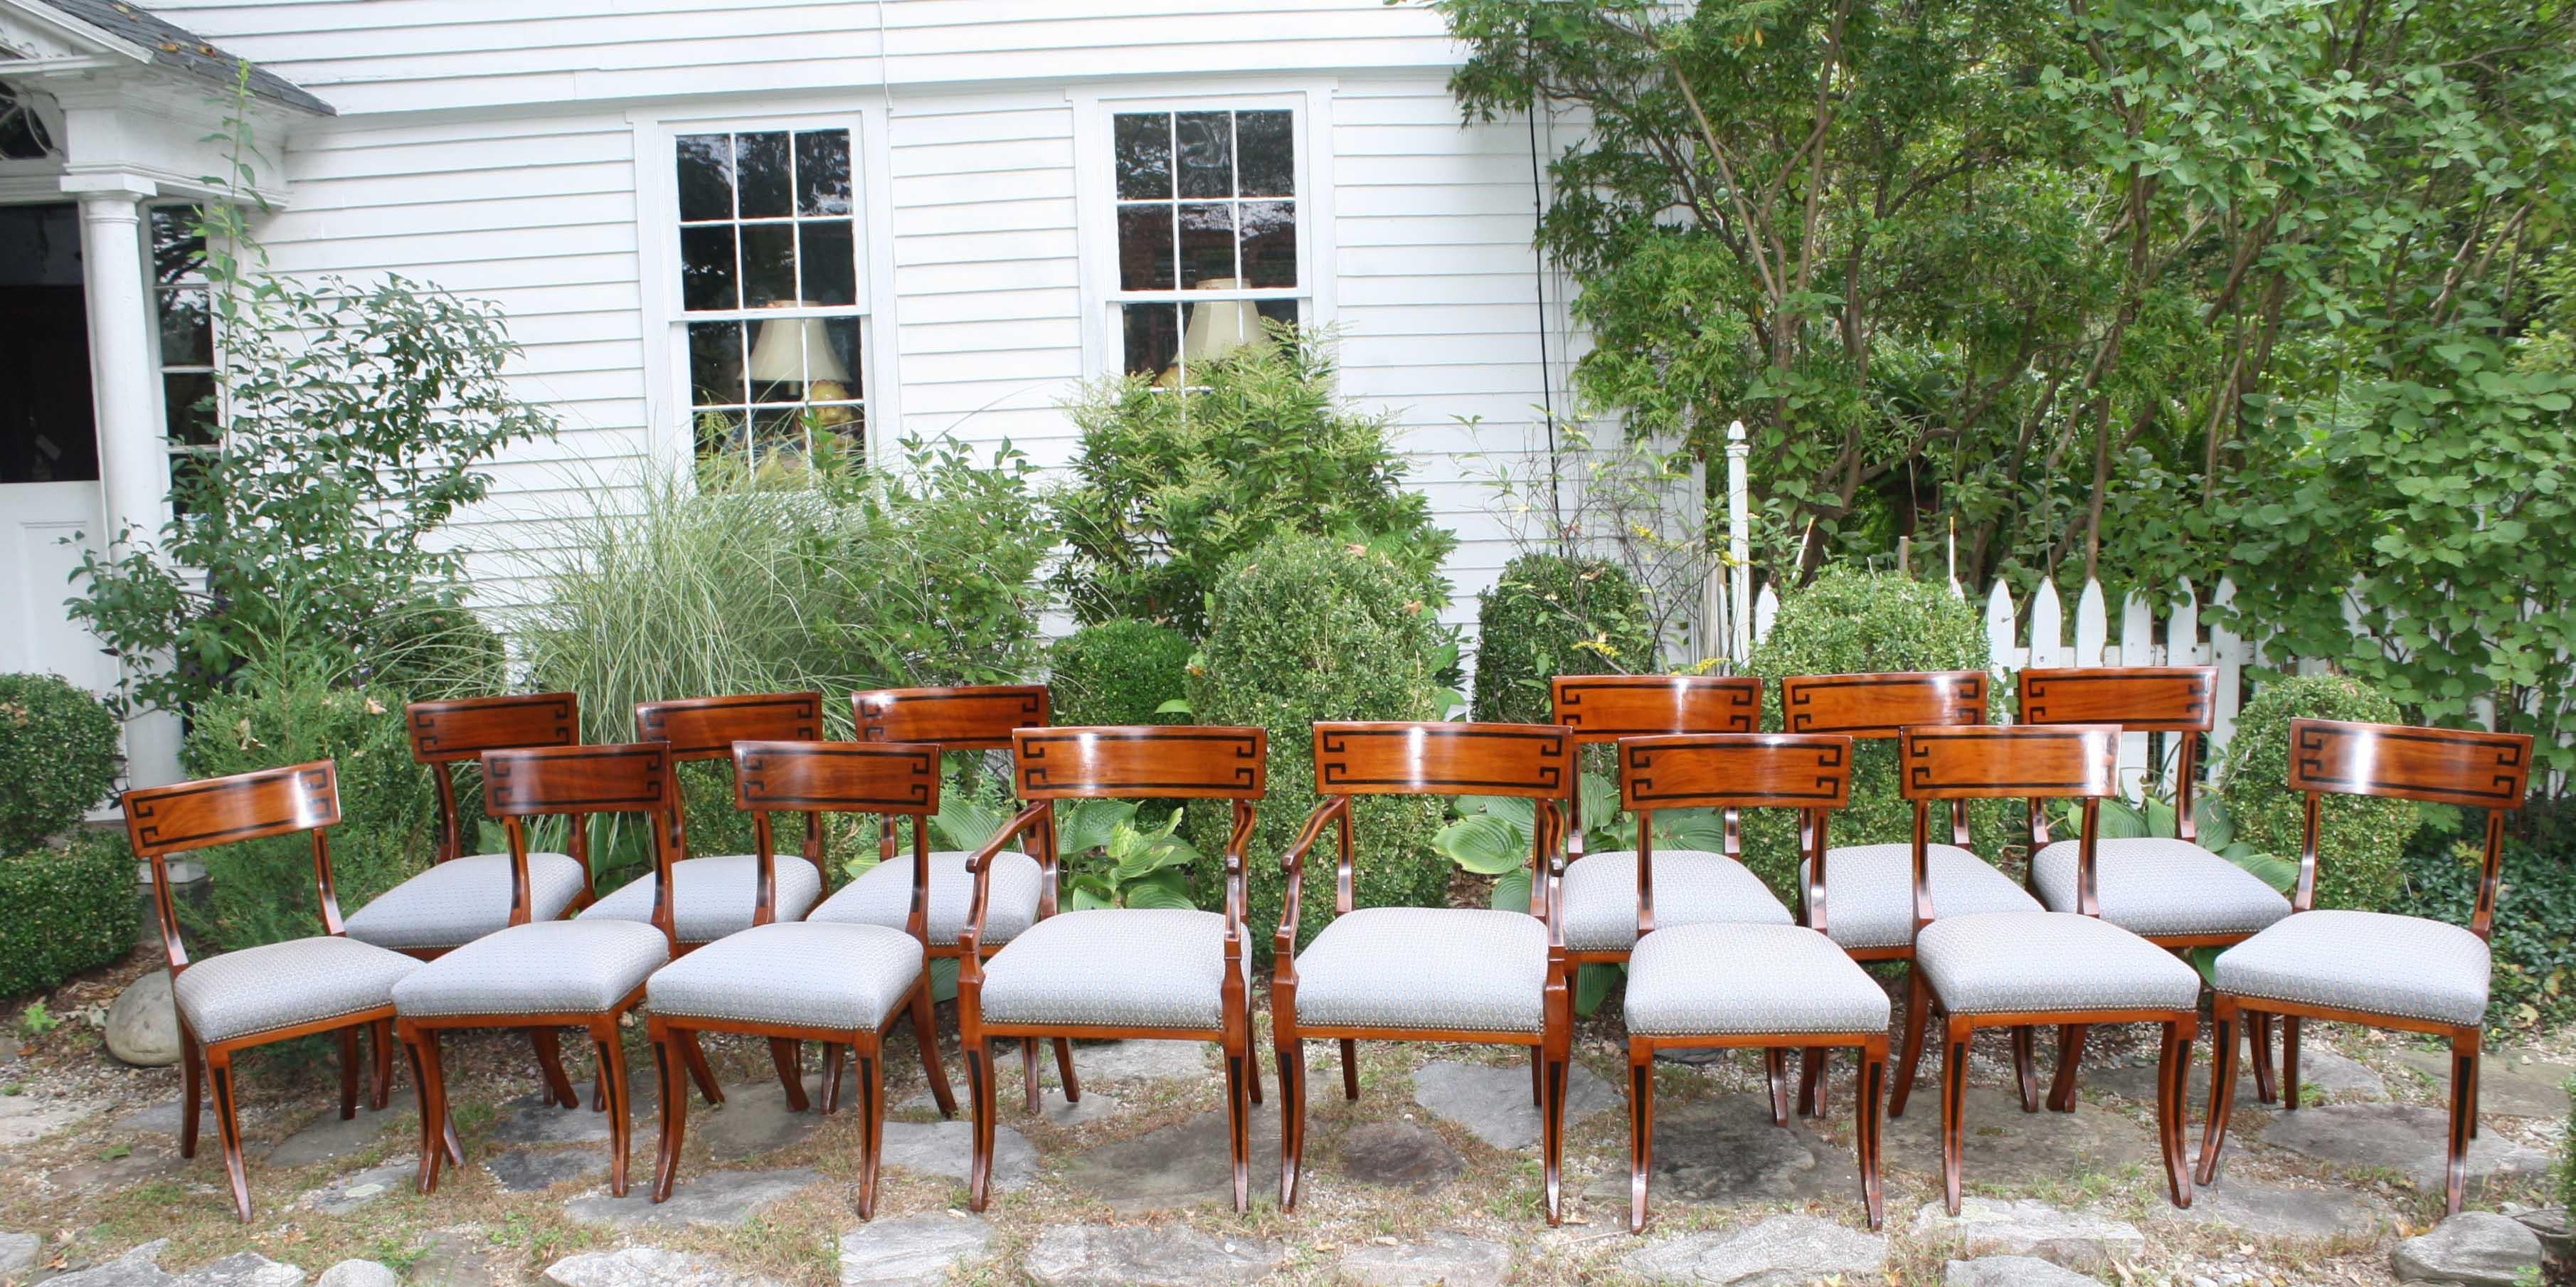 Set of fourteen English Regency period ebony inlaid dining chairs of Greek klismos form.
2 armchairs and 12 side chairs, of light honey-colored mahogany.  Serviceable upholstery if compatible with present decor.  Acquired from Hyde Park Antiques,